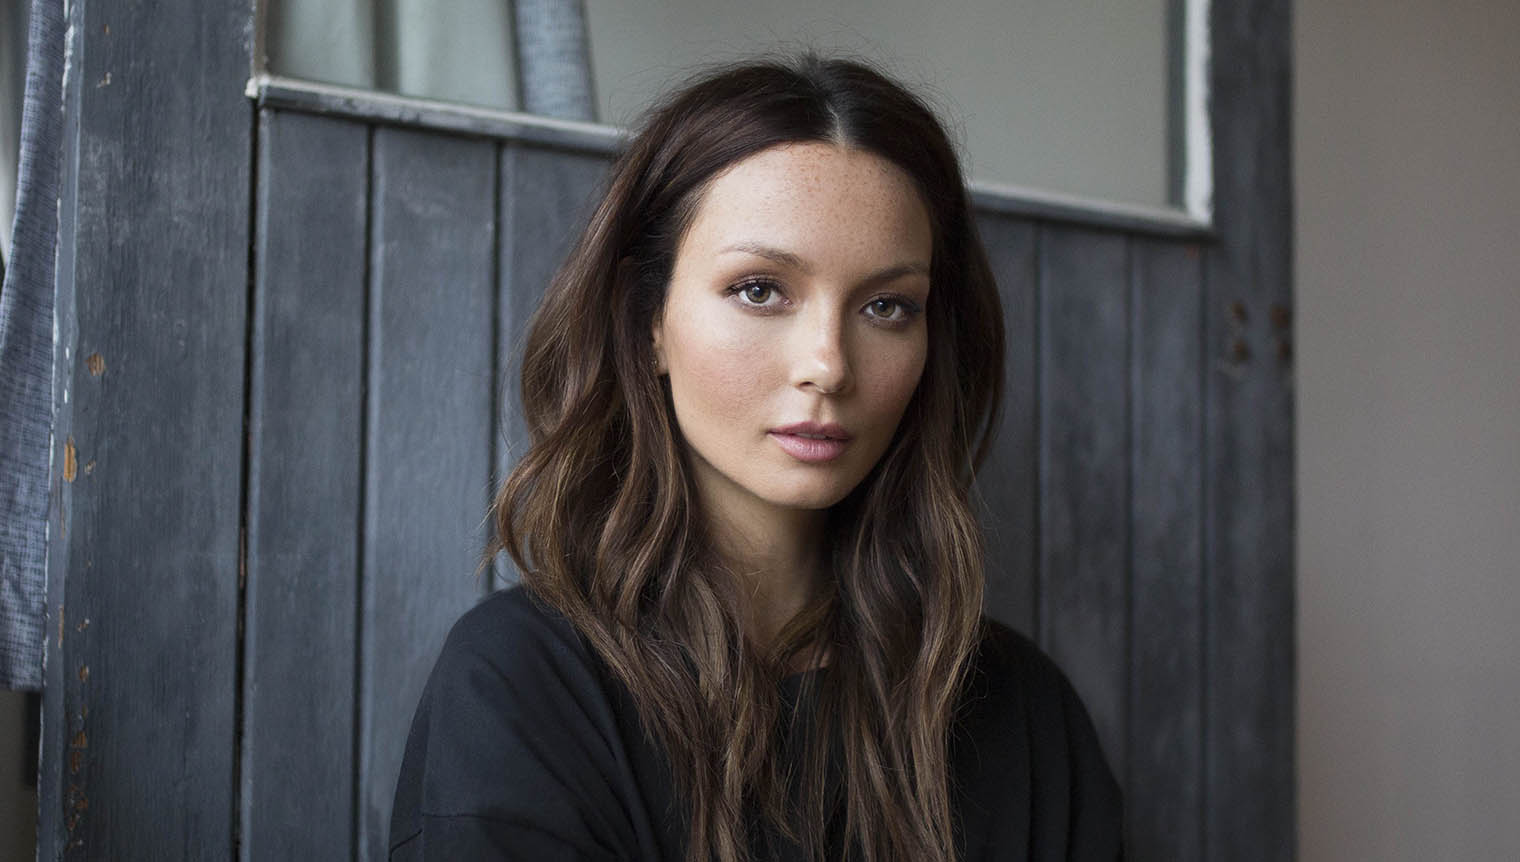 RICKI-LEE RELEASES INFECTIOUS NEW SINGLE 'POINT OF NO RETURN' — TT